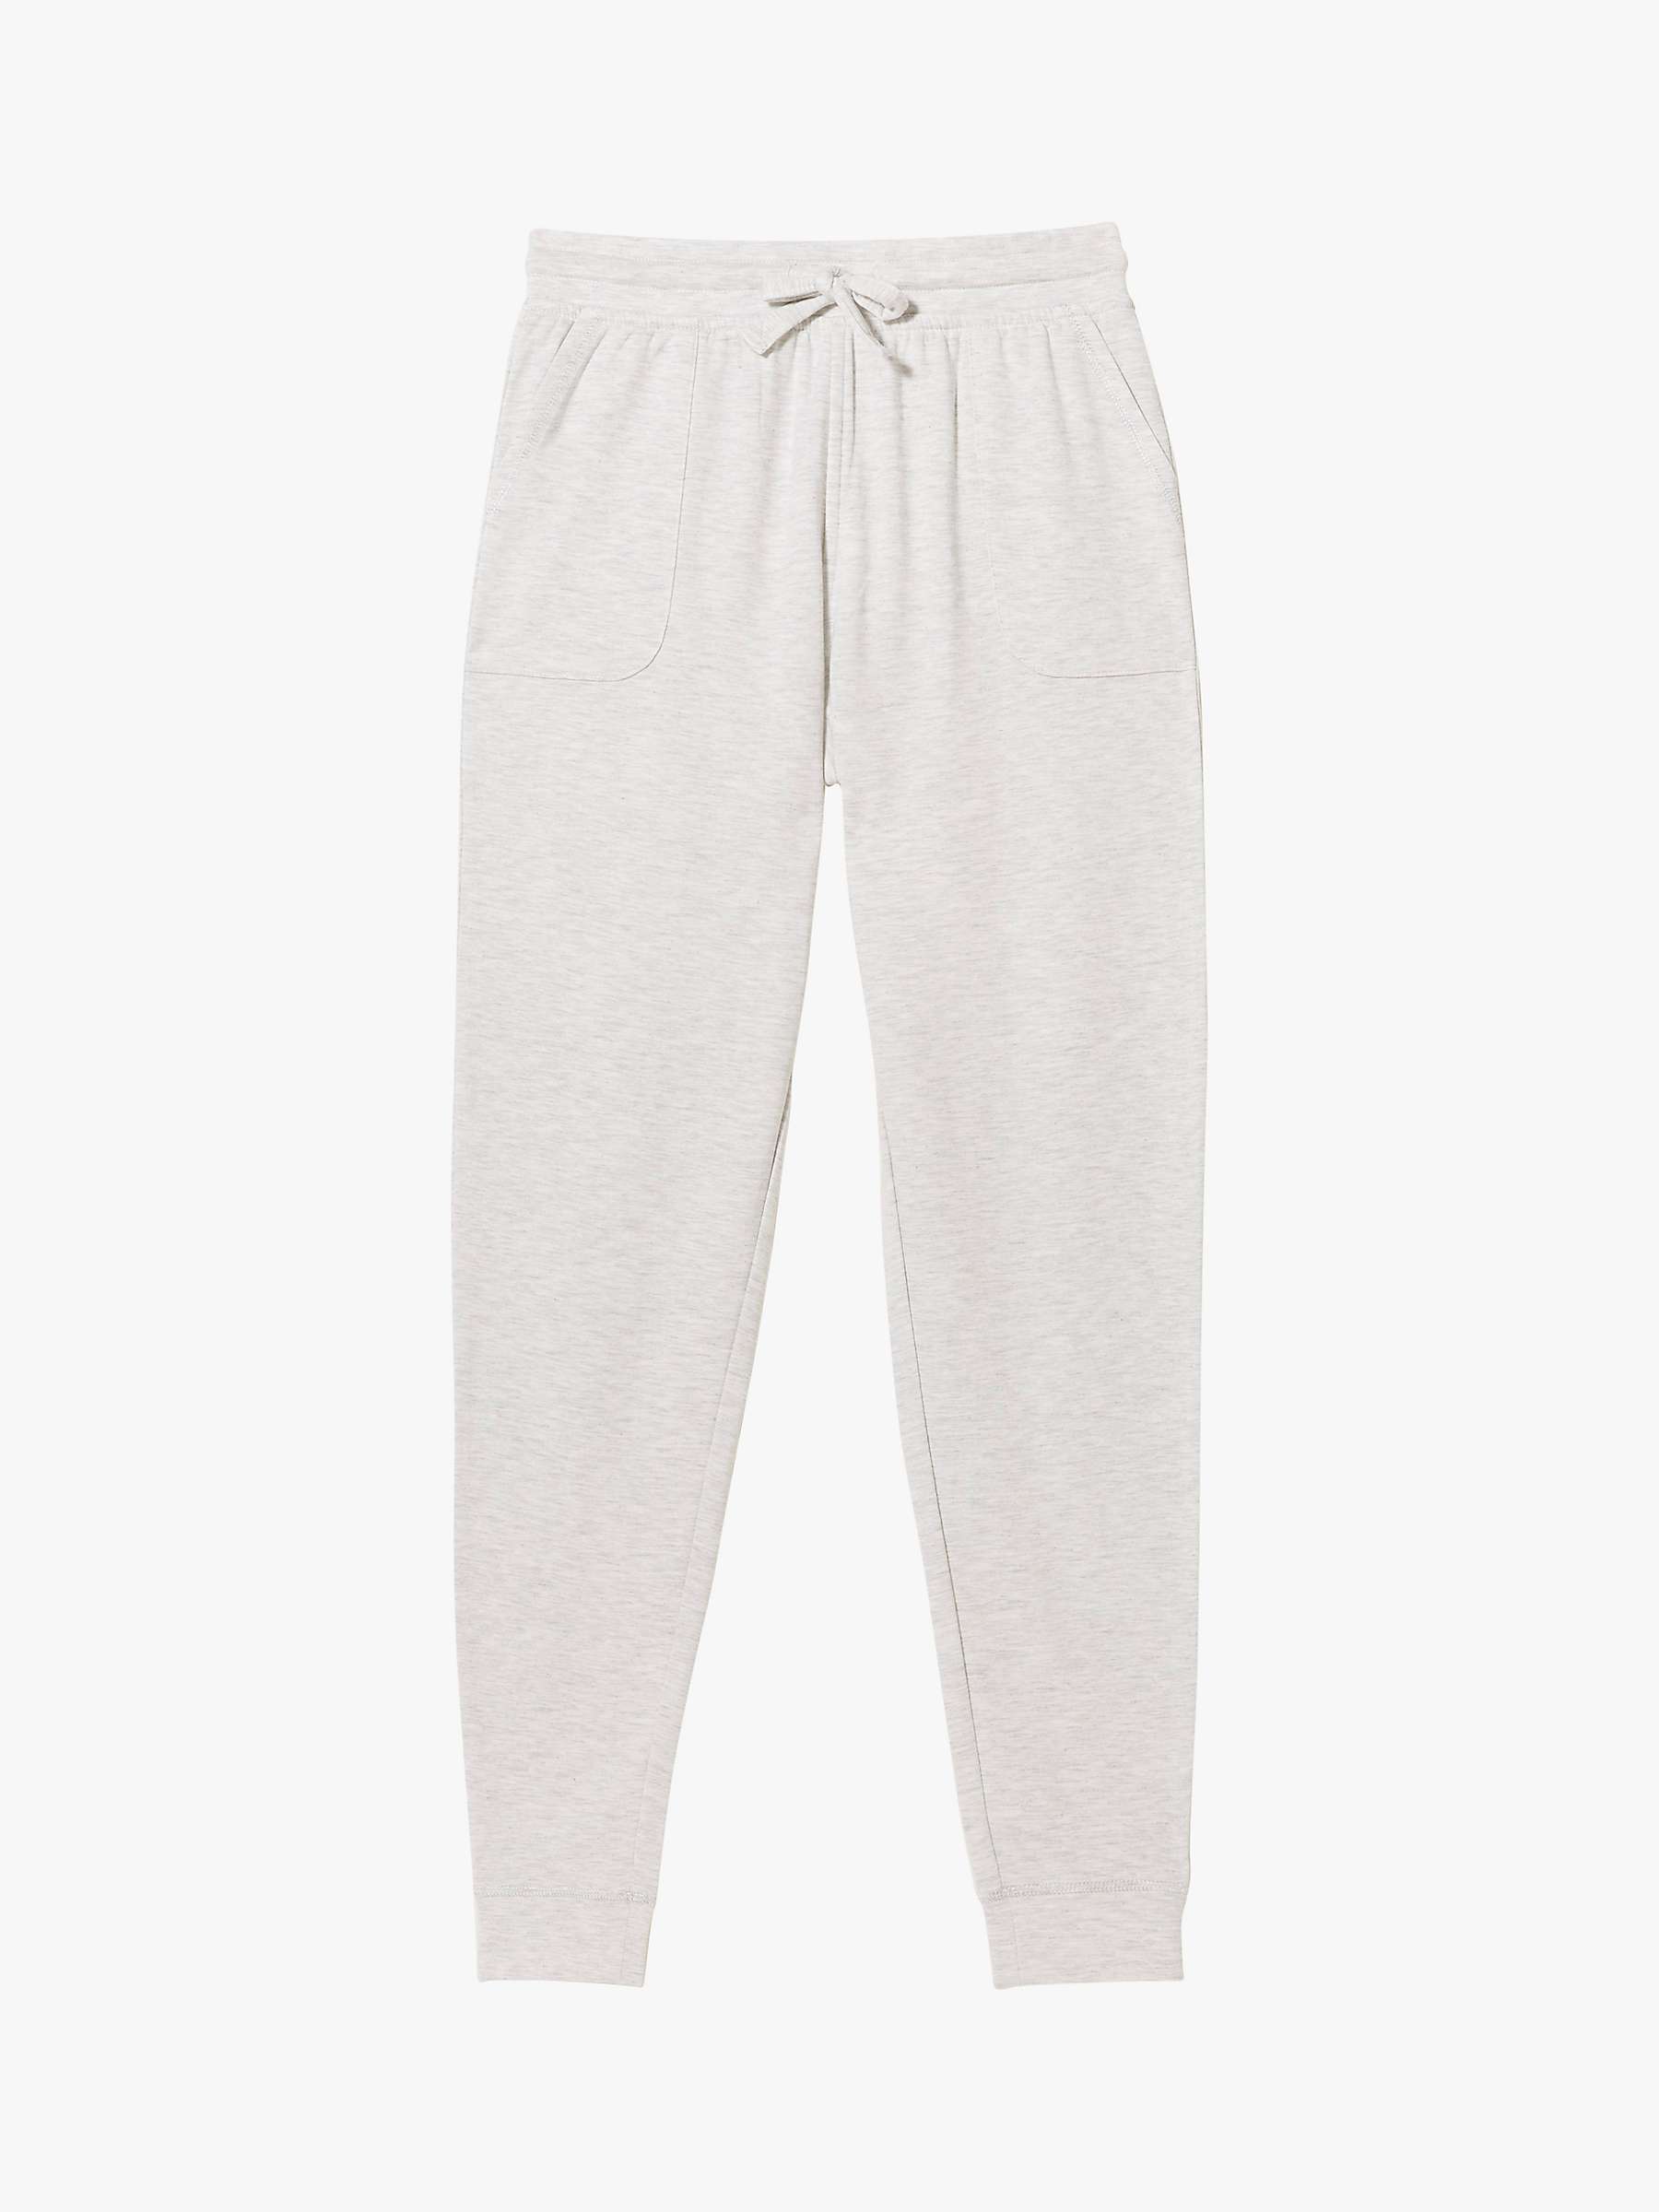 Buy FatFace Soft Joggers, Grey Marl Online at johnlewis.com